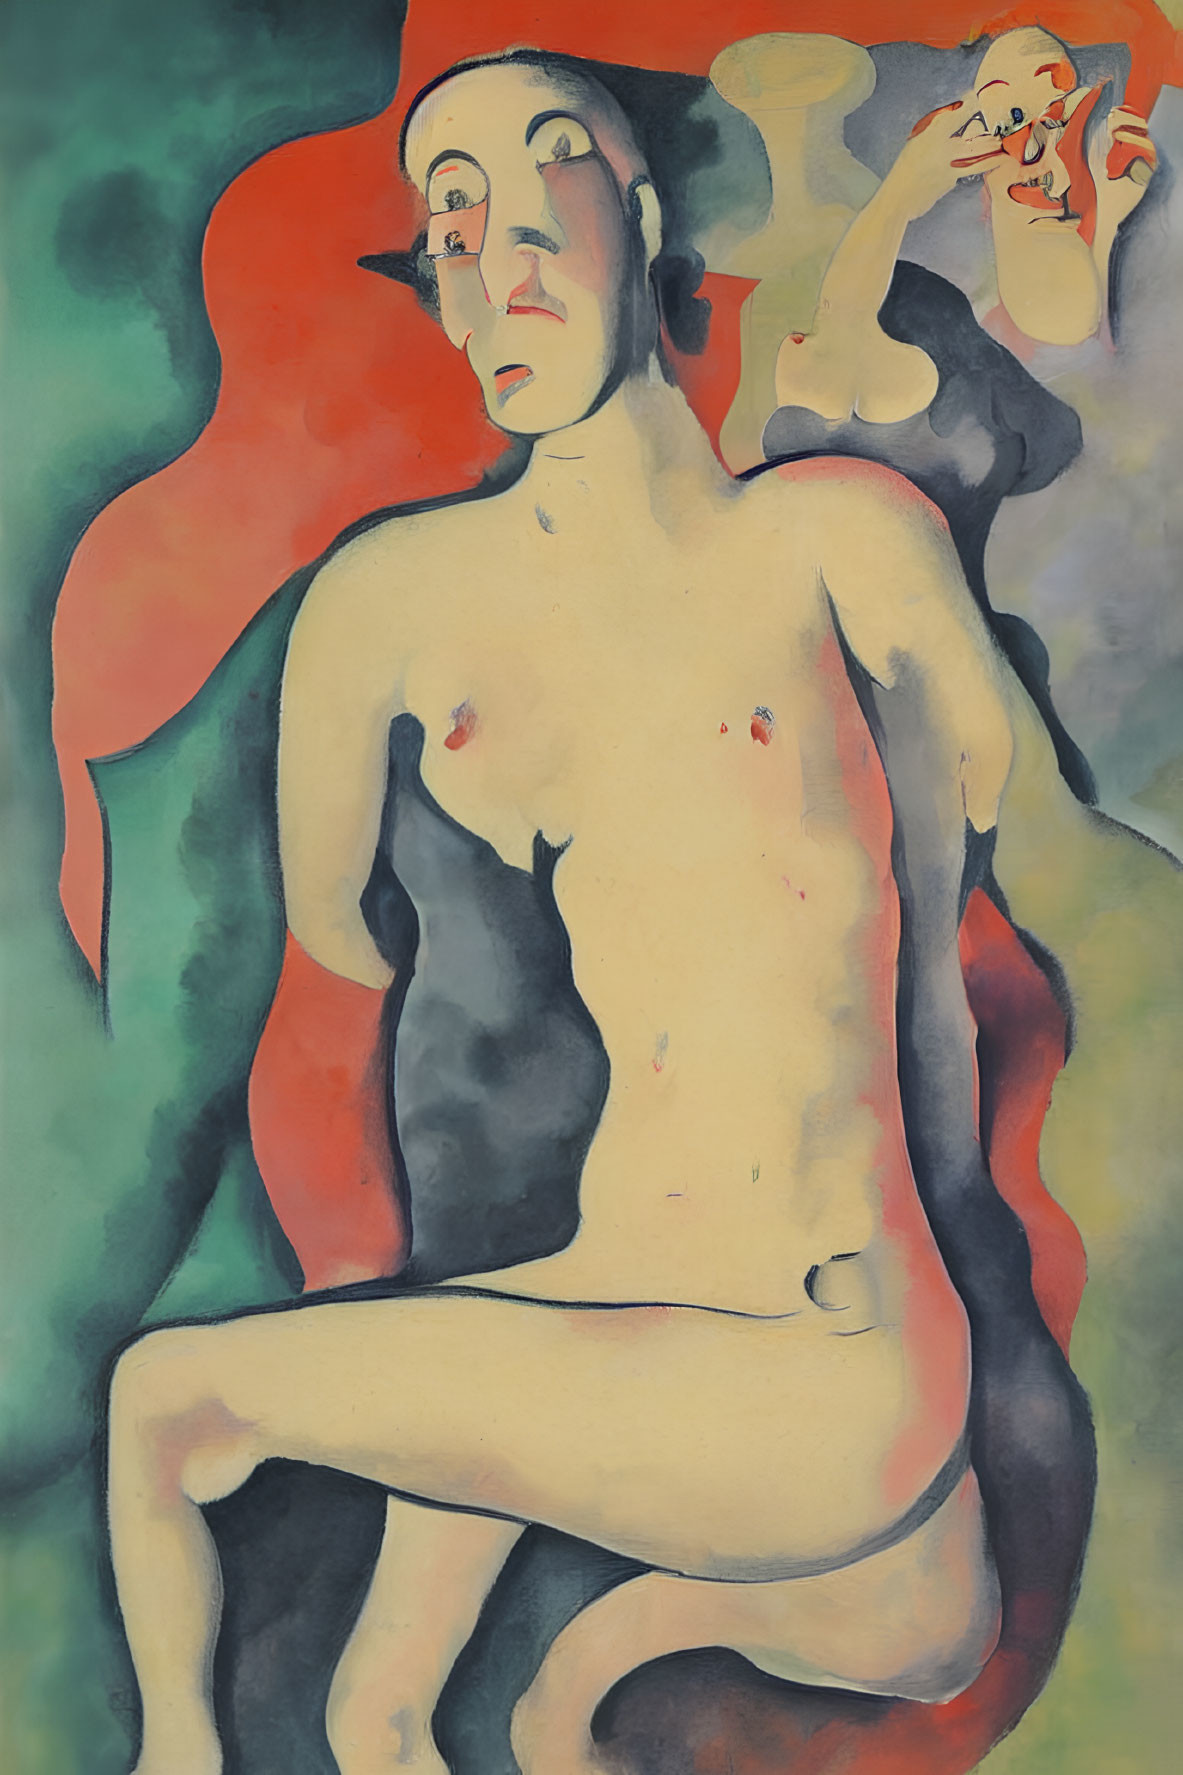 Vibrant abstract painting of seated nude figure with stylized features